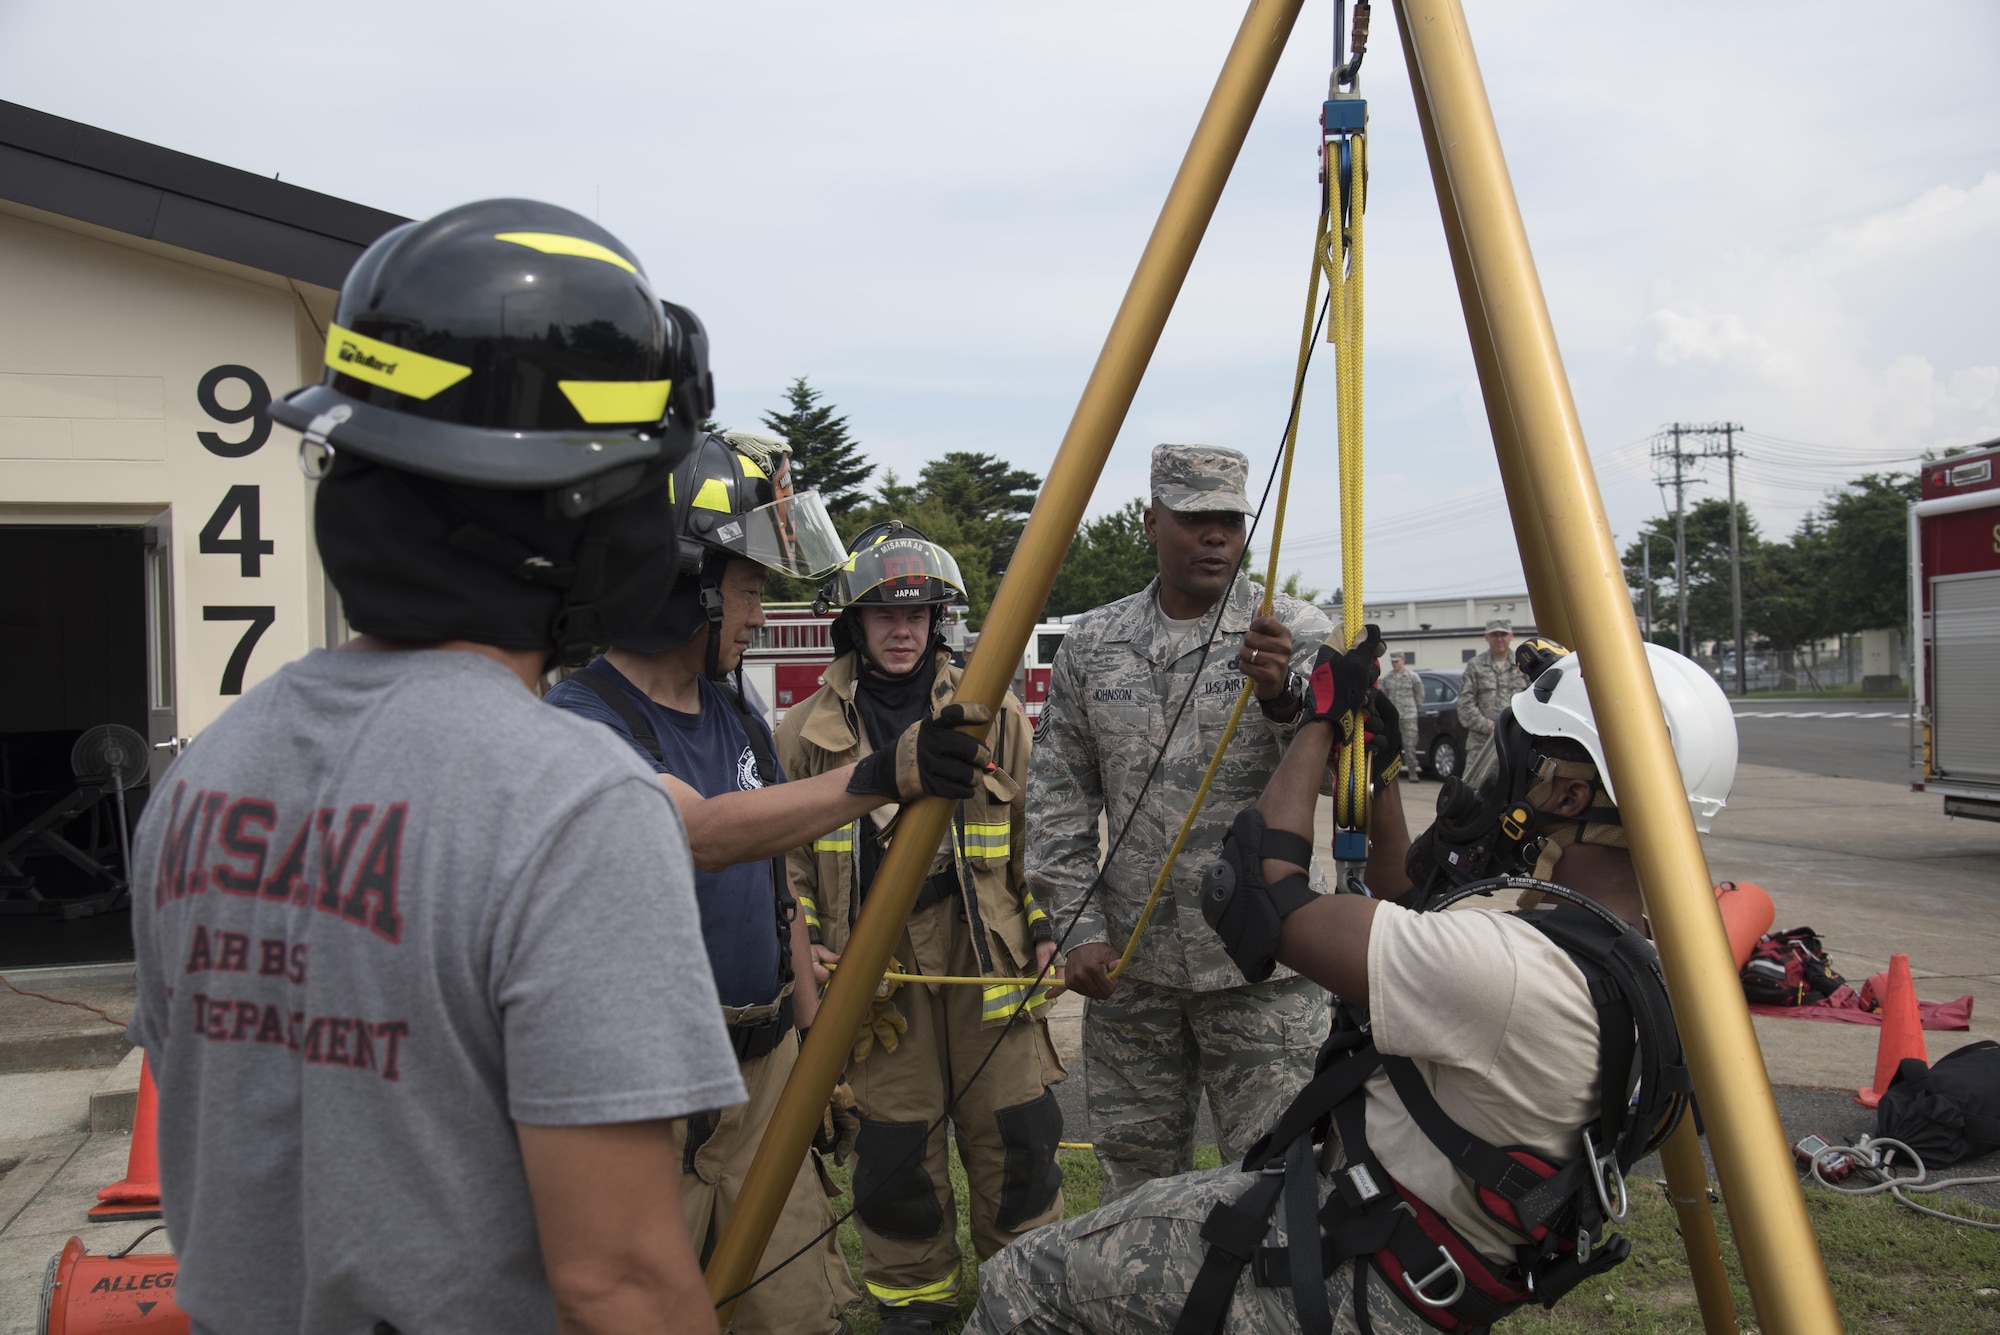 U.S. Air Force Chief Master Sgt. Anthony Johnson, the Pacific Air Forces' command chief, watches 35th Civil Engineer Squadron firefighters demonstrate entering a confined space using a tripod, at Misawa Air Base, Japan, July 11, 2017. Johnson, once a security forces troop, now oversees more than 40,000 enlisted personnel in his position and advises the PACAF commander on all matters affecting the readiness, training, professional development and effective utilization of assigned enlisted members. (U.S. Air Force photo by Airman 1st Class Sadie Colbert)